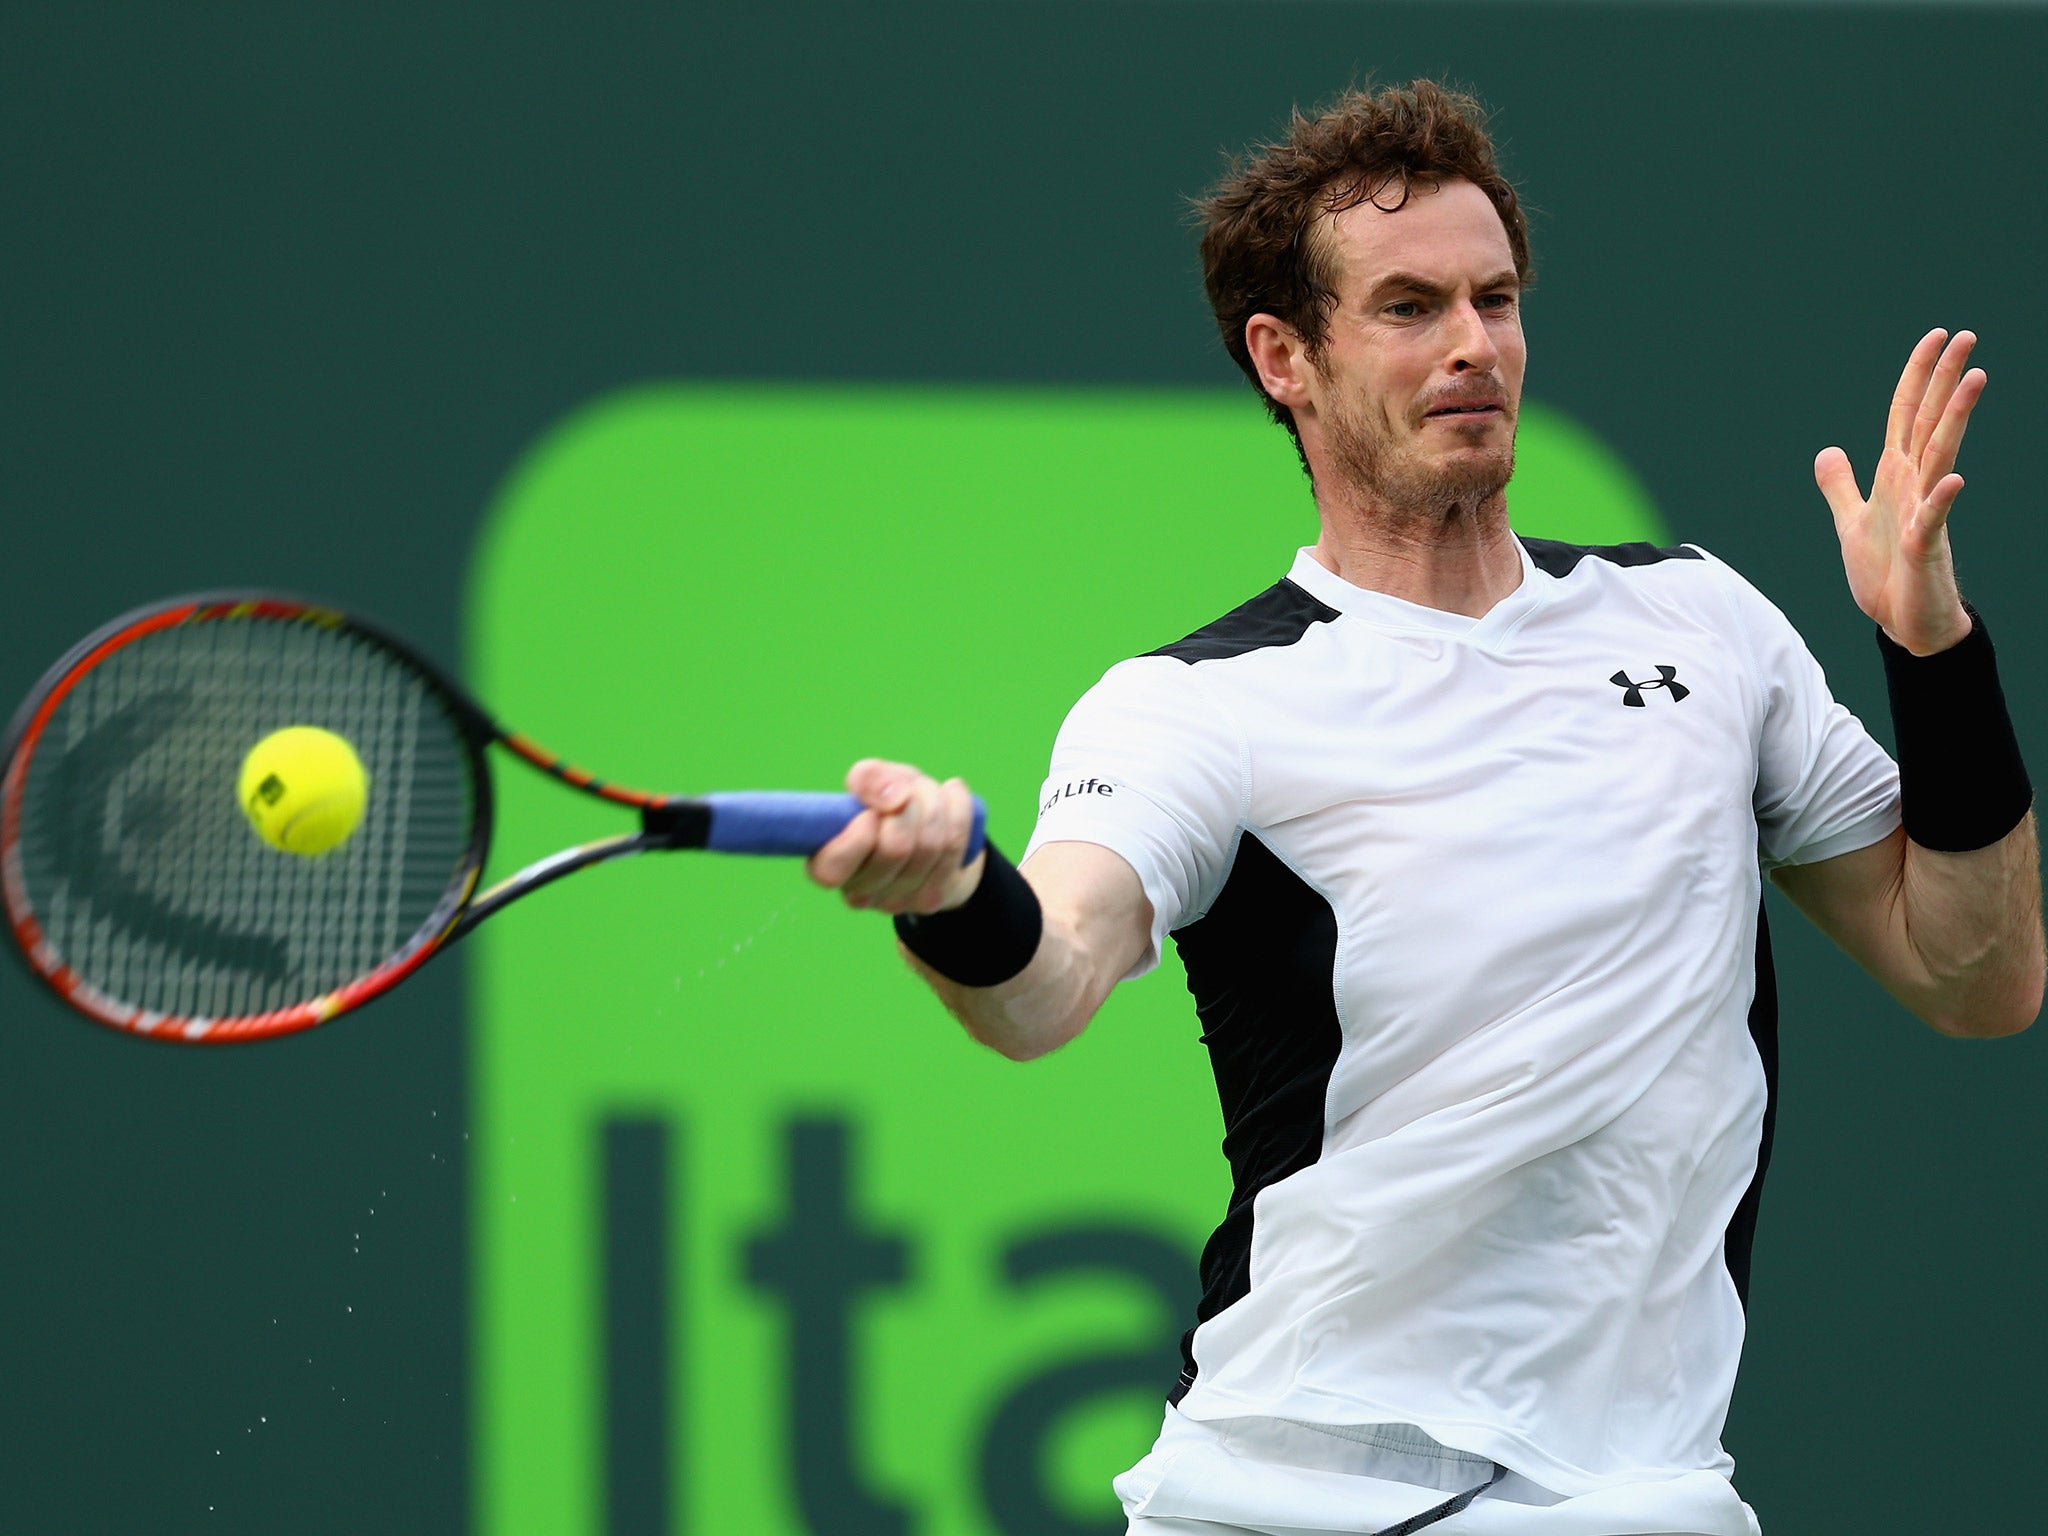 Andy Murray will hold on to his world ranking of No 2 despite early elimination in the Miami Open